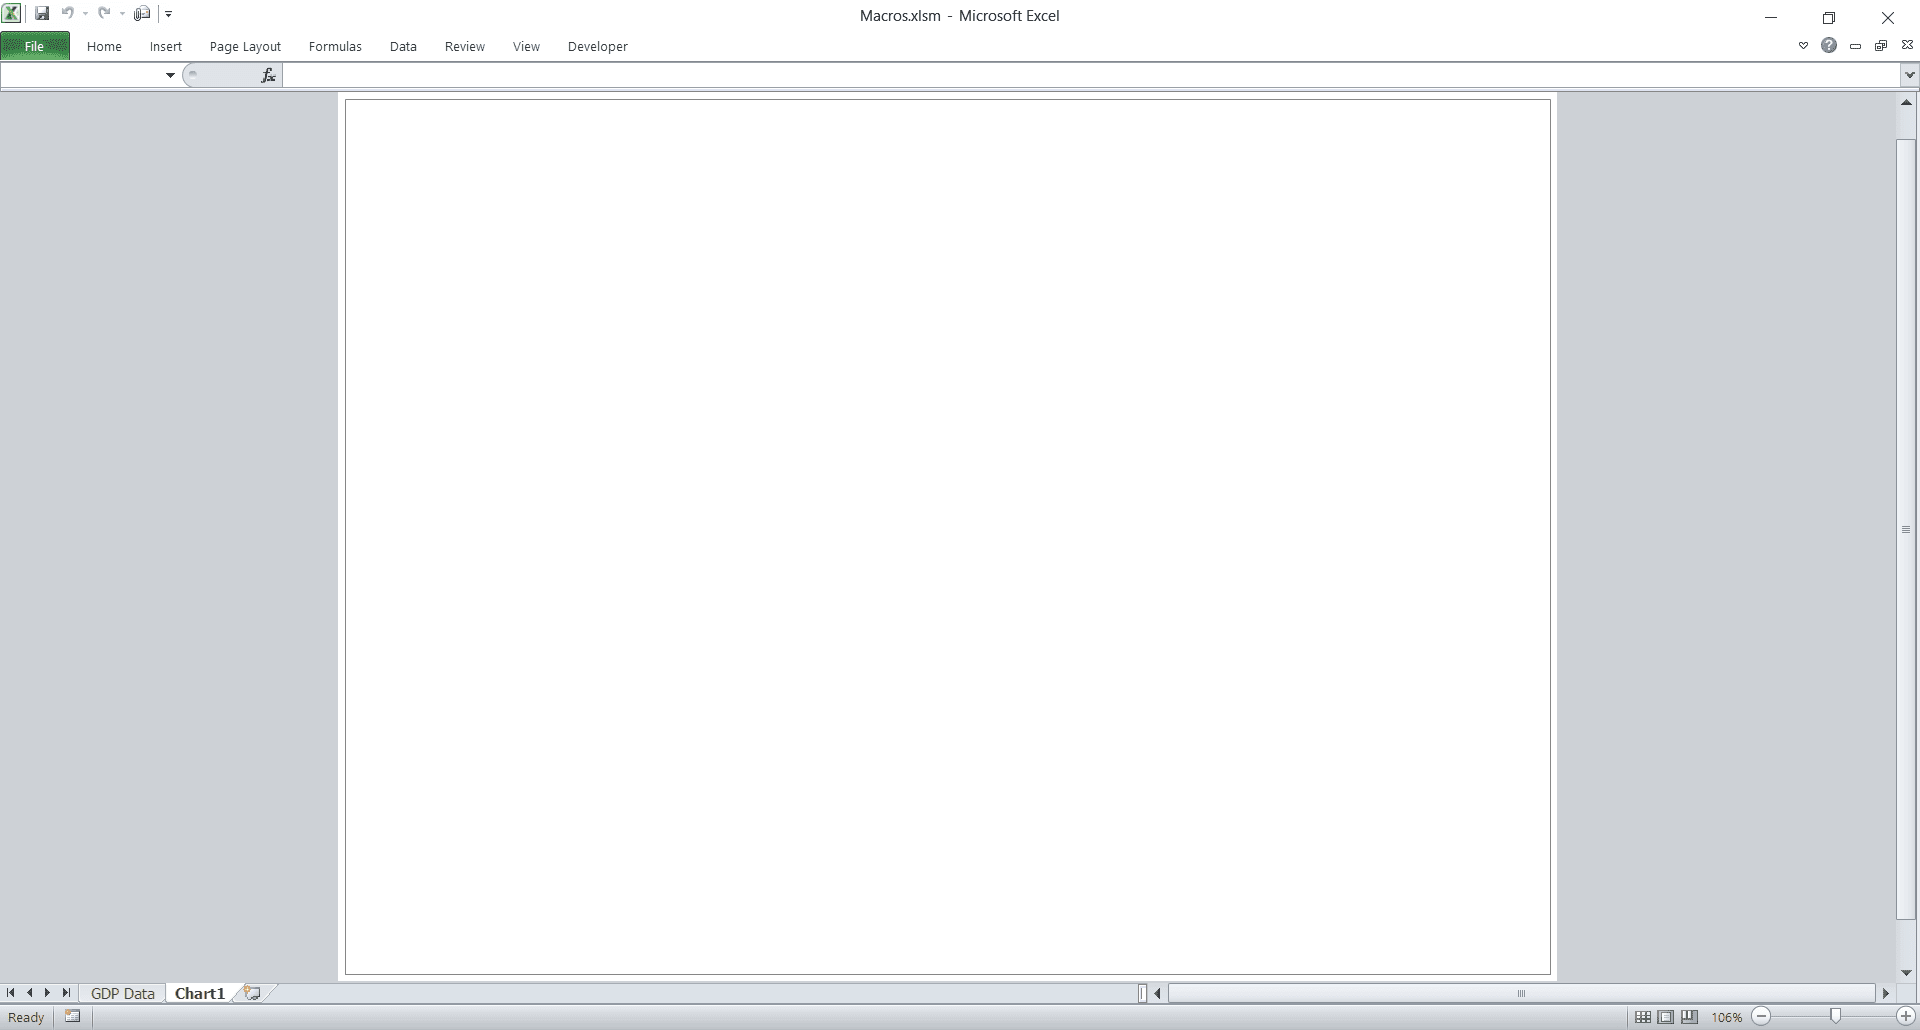 Blank Chart Sheet on its own tab